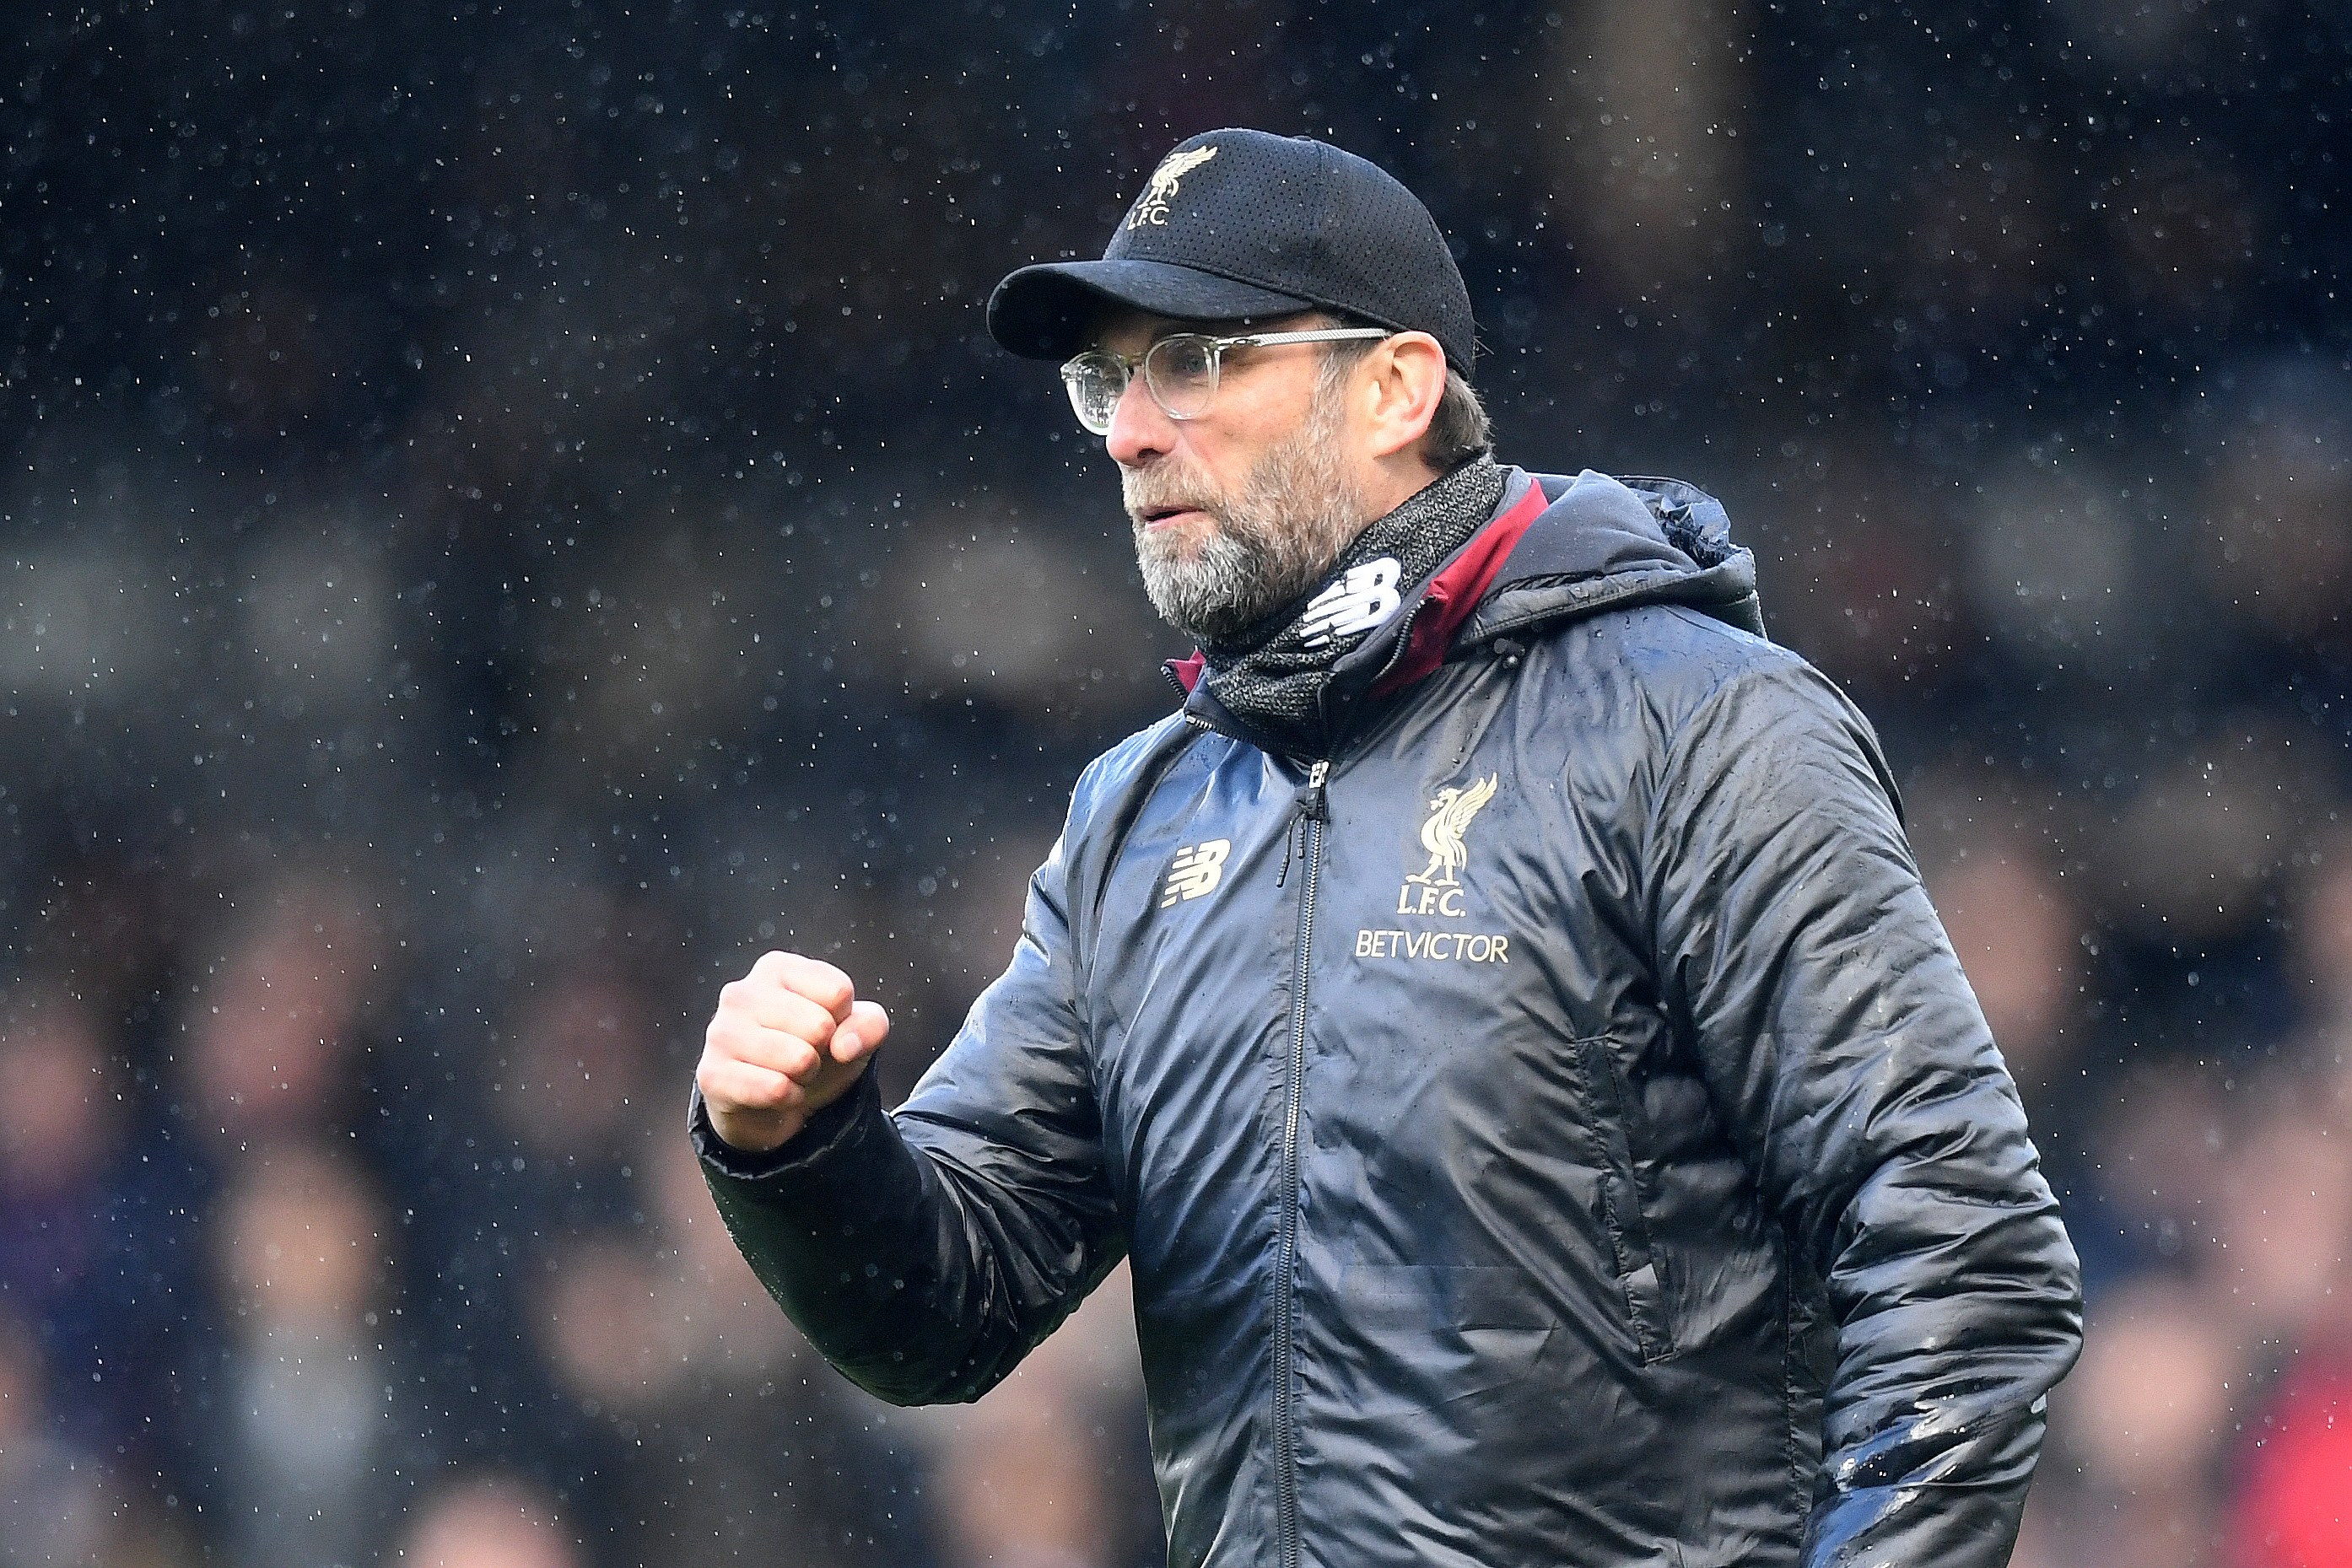 LONDON, ENGLAND - MARCH 17: Jurgen Klopp, Manager of Liverpool celebrates at the full time whistle after  the Premier League match between Fulham FC and Liverpool FC at Craven Cottage on March 17, 2019 in London, United Kingdom. (Photo by Michael Regan/Getty Images)